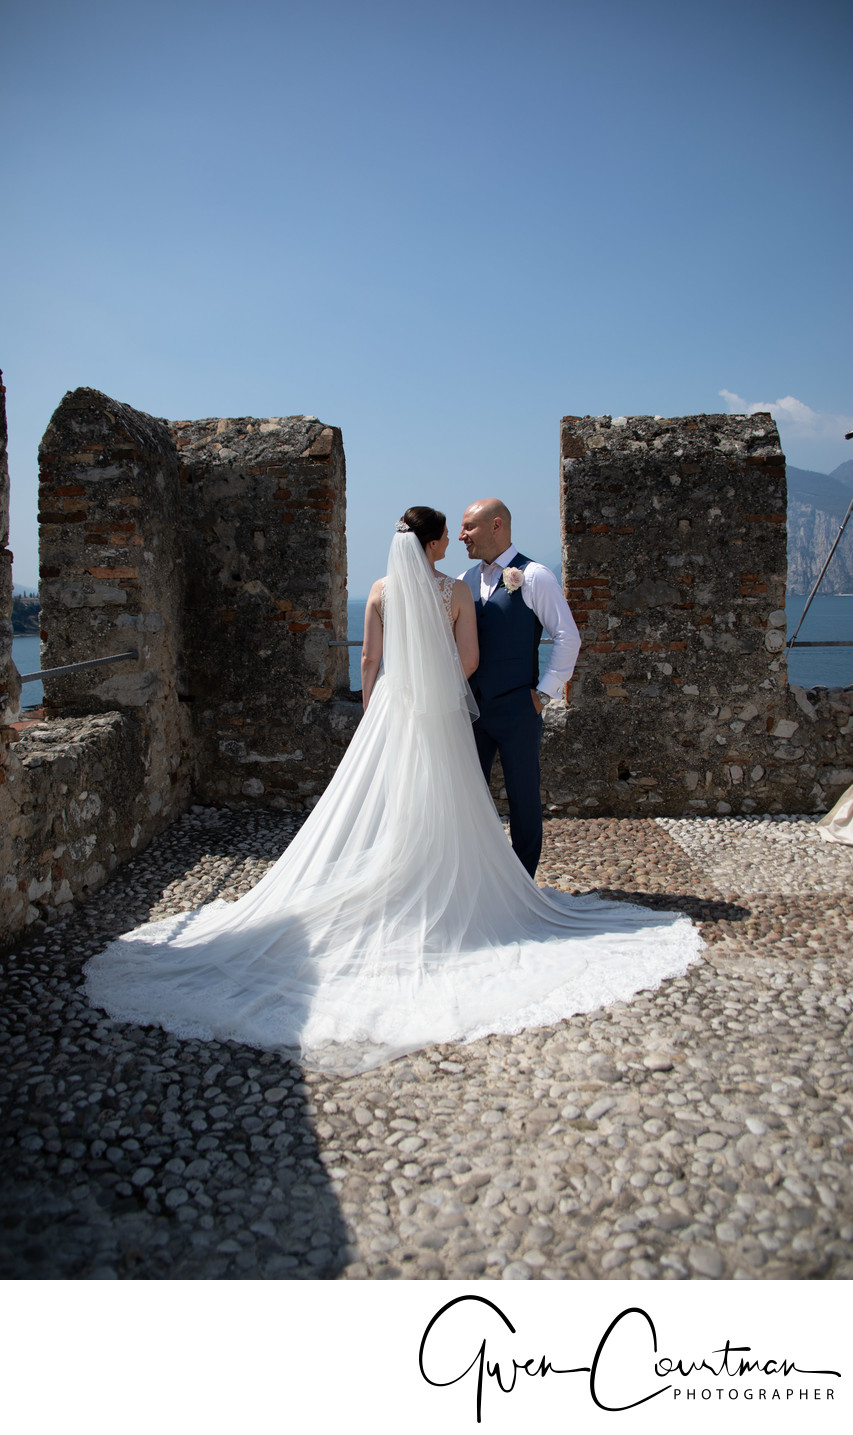 Penny and James on Malcesine Castle Terrace